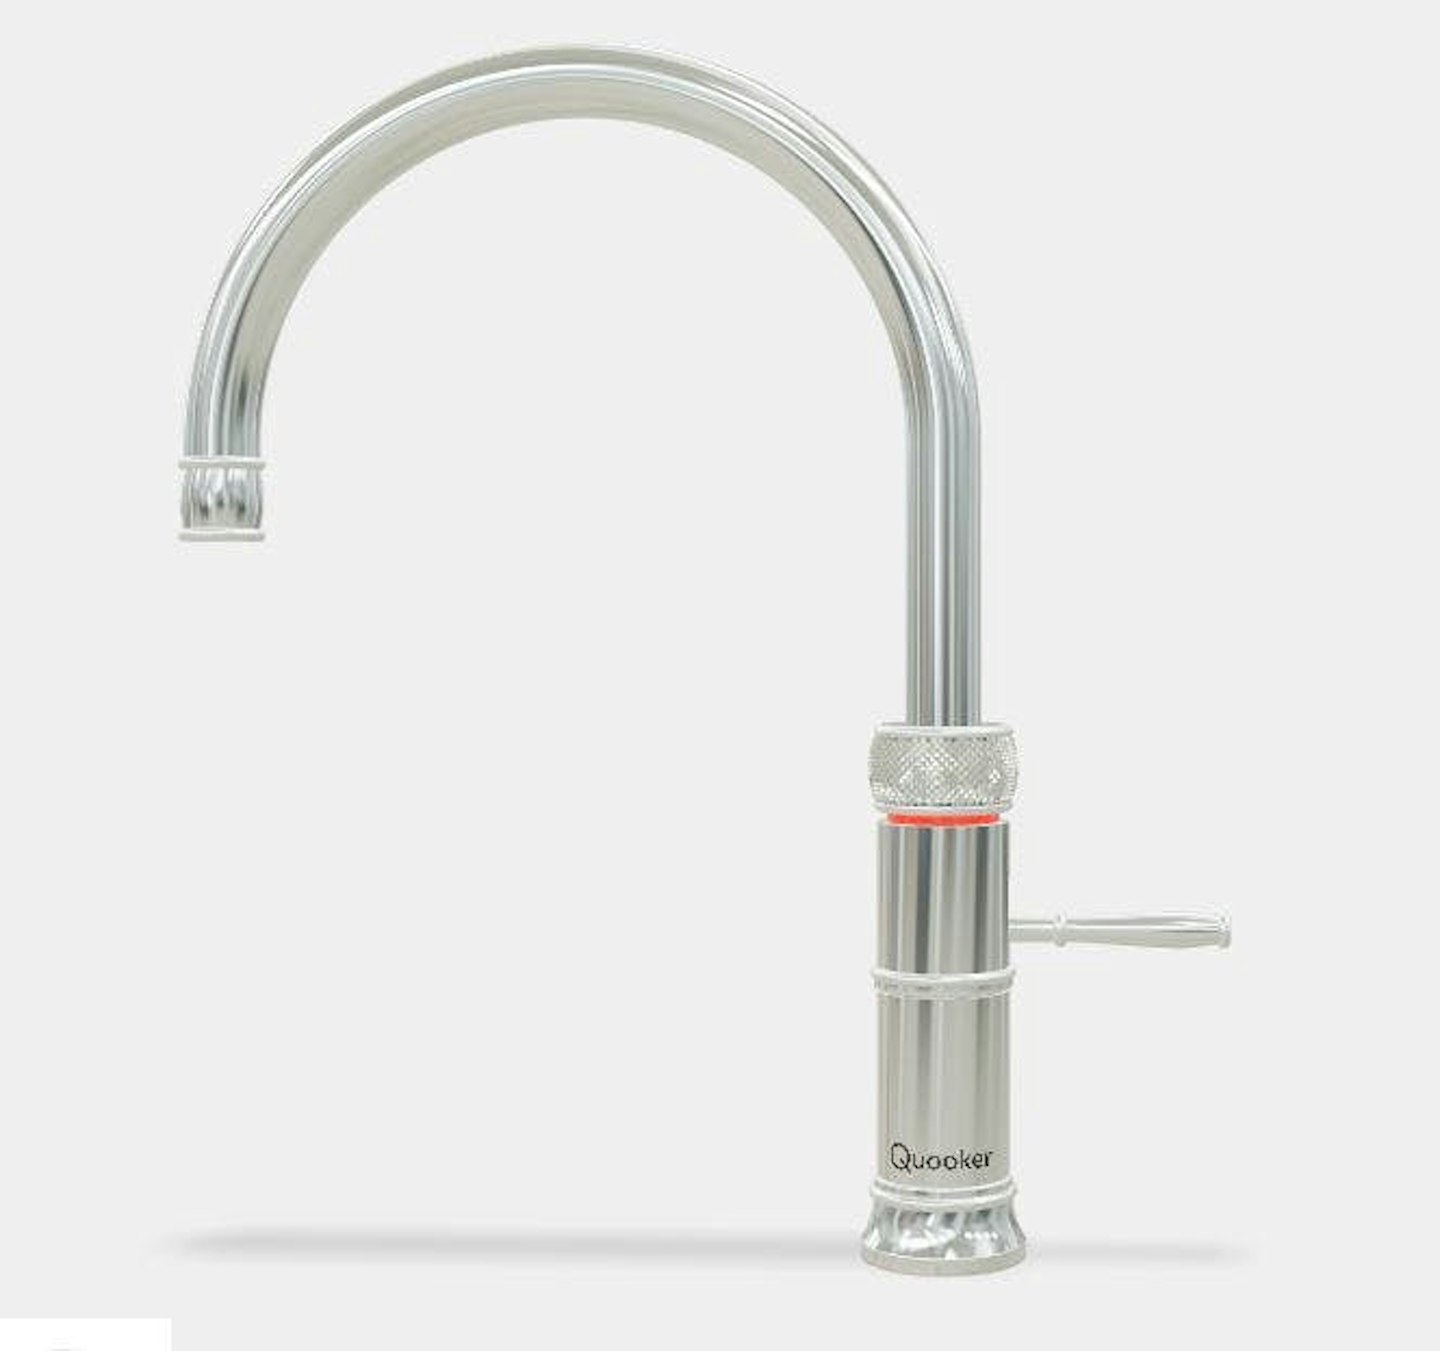 Best boiling water taps: Quooker Fusion Round Chrome Boiling Water Tap